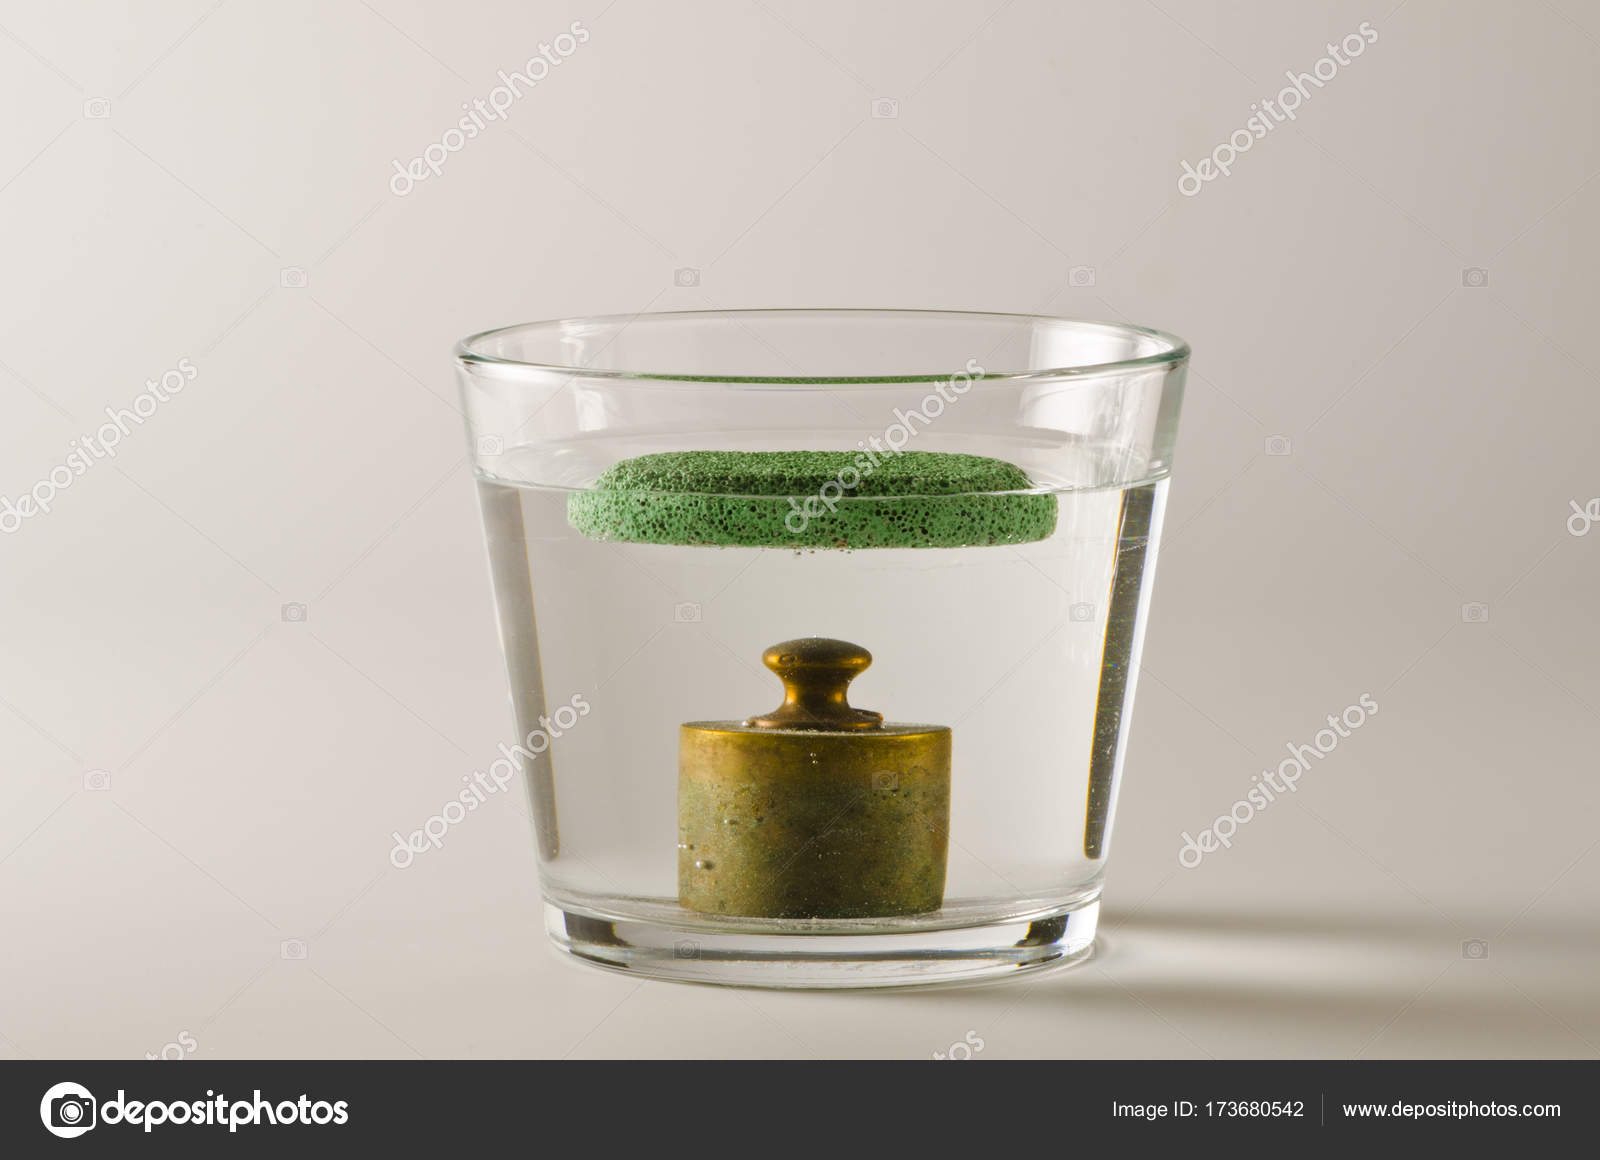 Pictures Objects That Float In Water Physics Heavy And